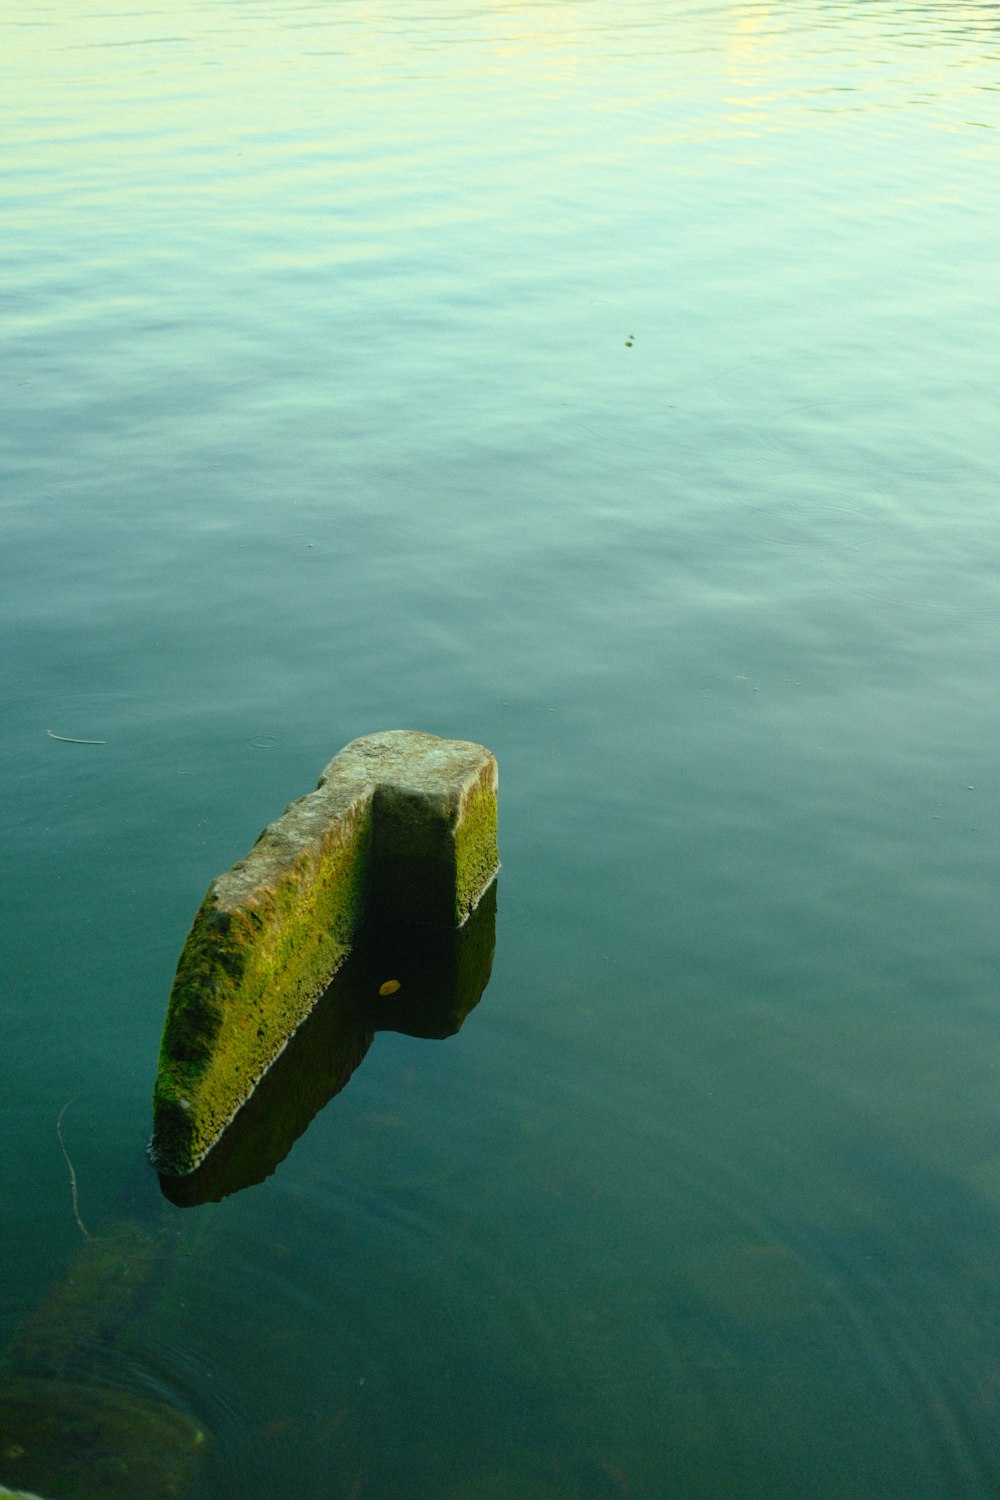 a concrete block floating on top of a body of water